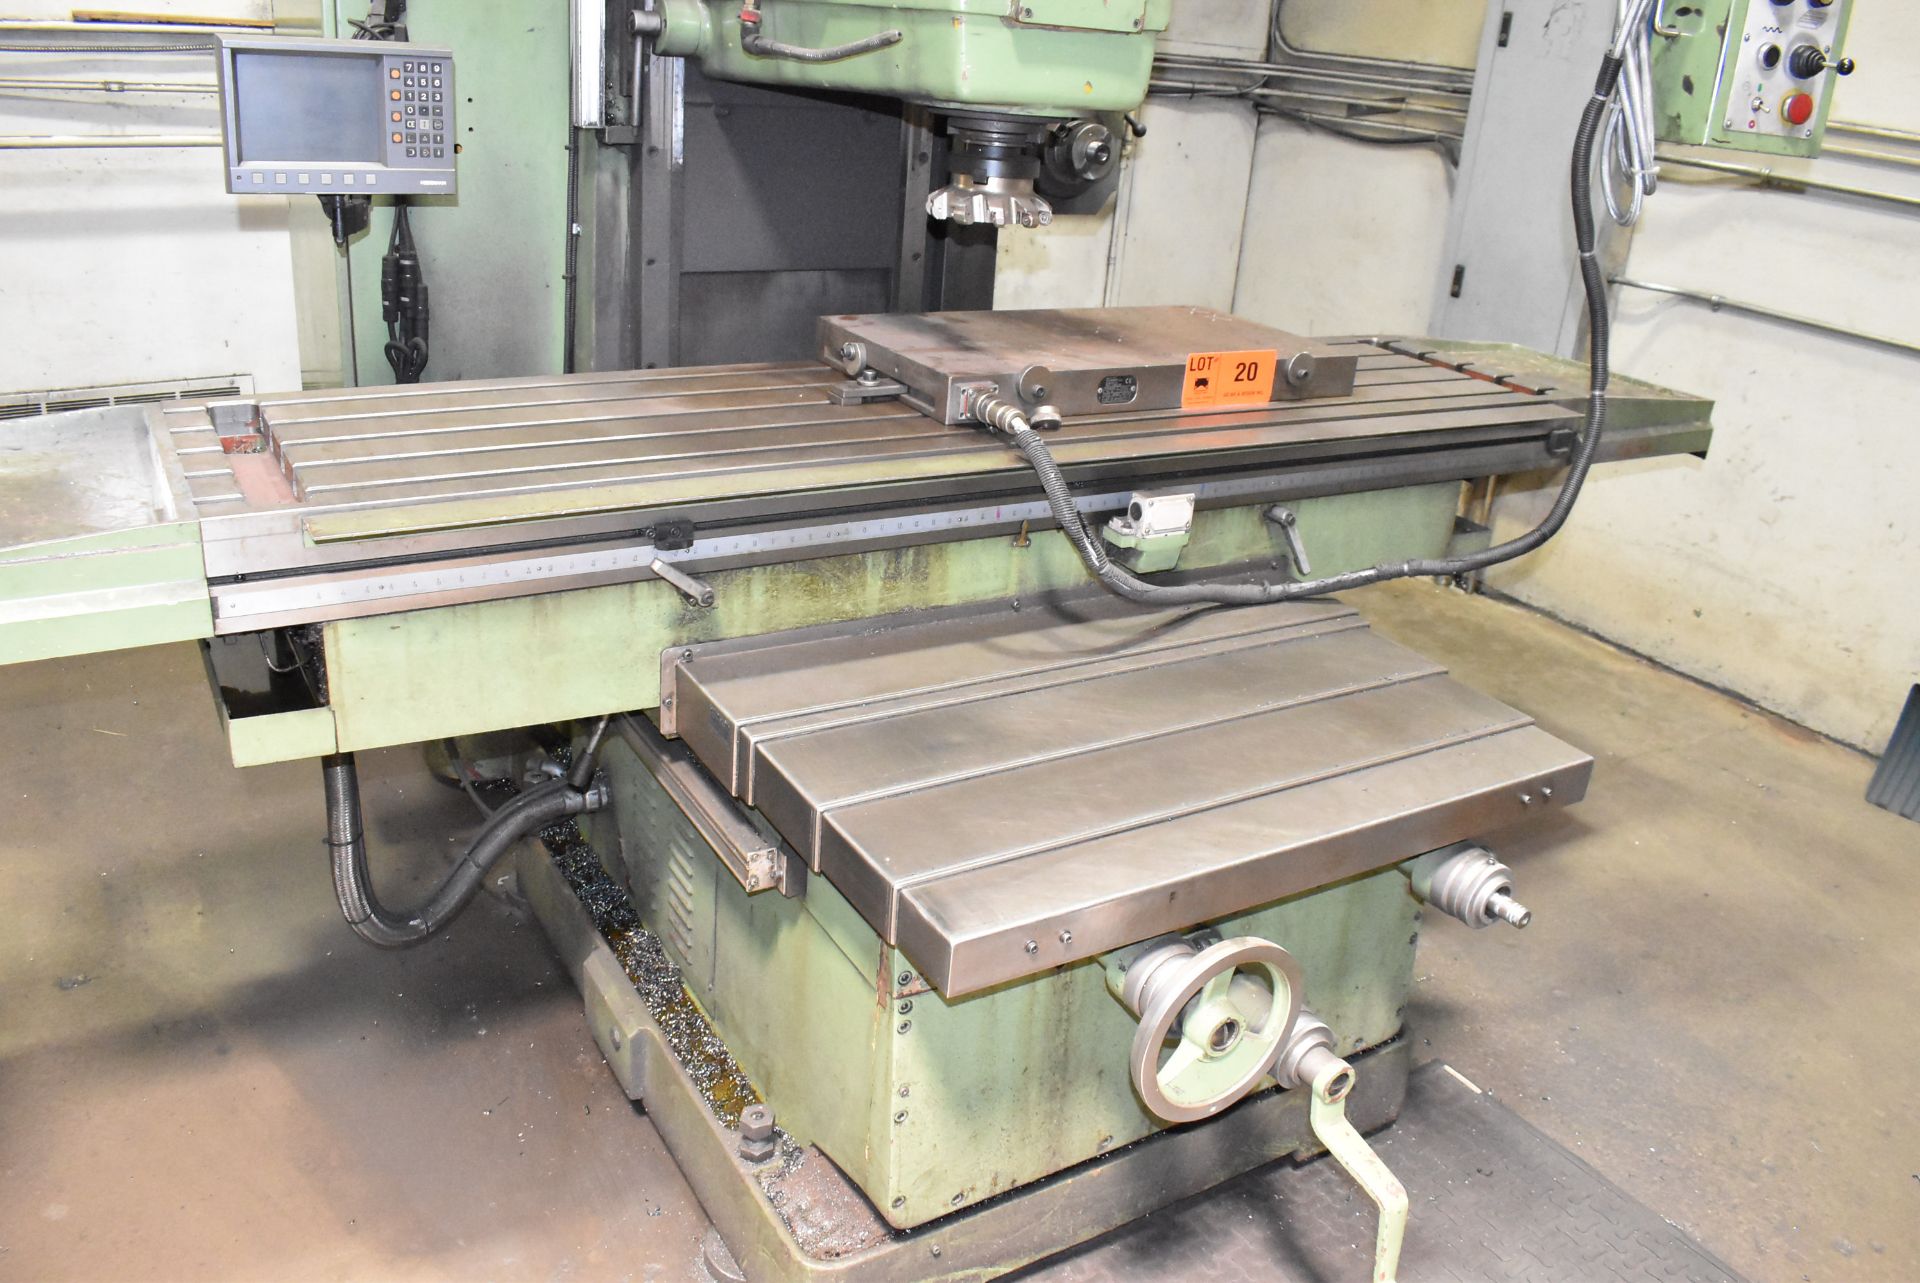 DAHLIH (2004) DL-V1600 BED-TYPE UNIVERSAL MILLING MACHINE WITH 82"X20" TABLE, TRAVELS: - Image 5 of 12